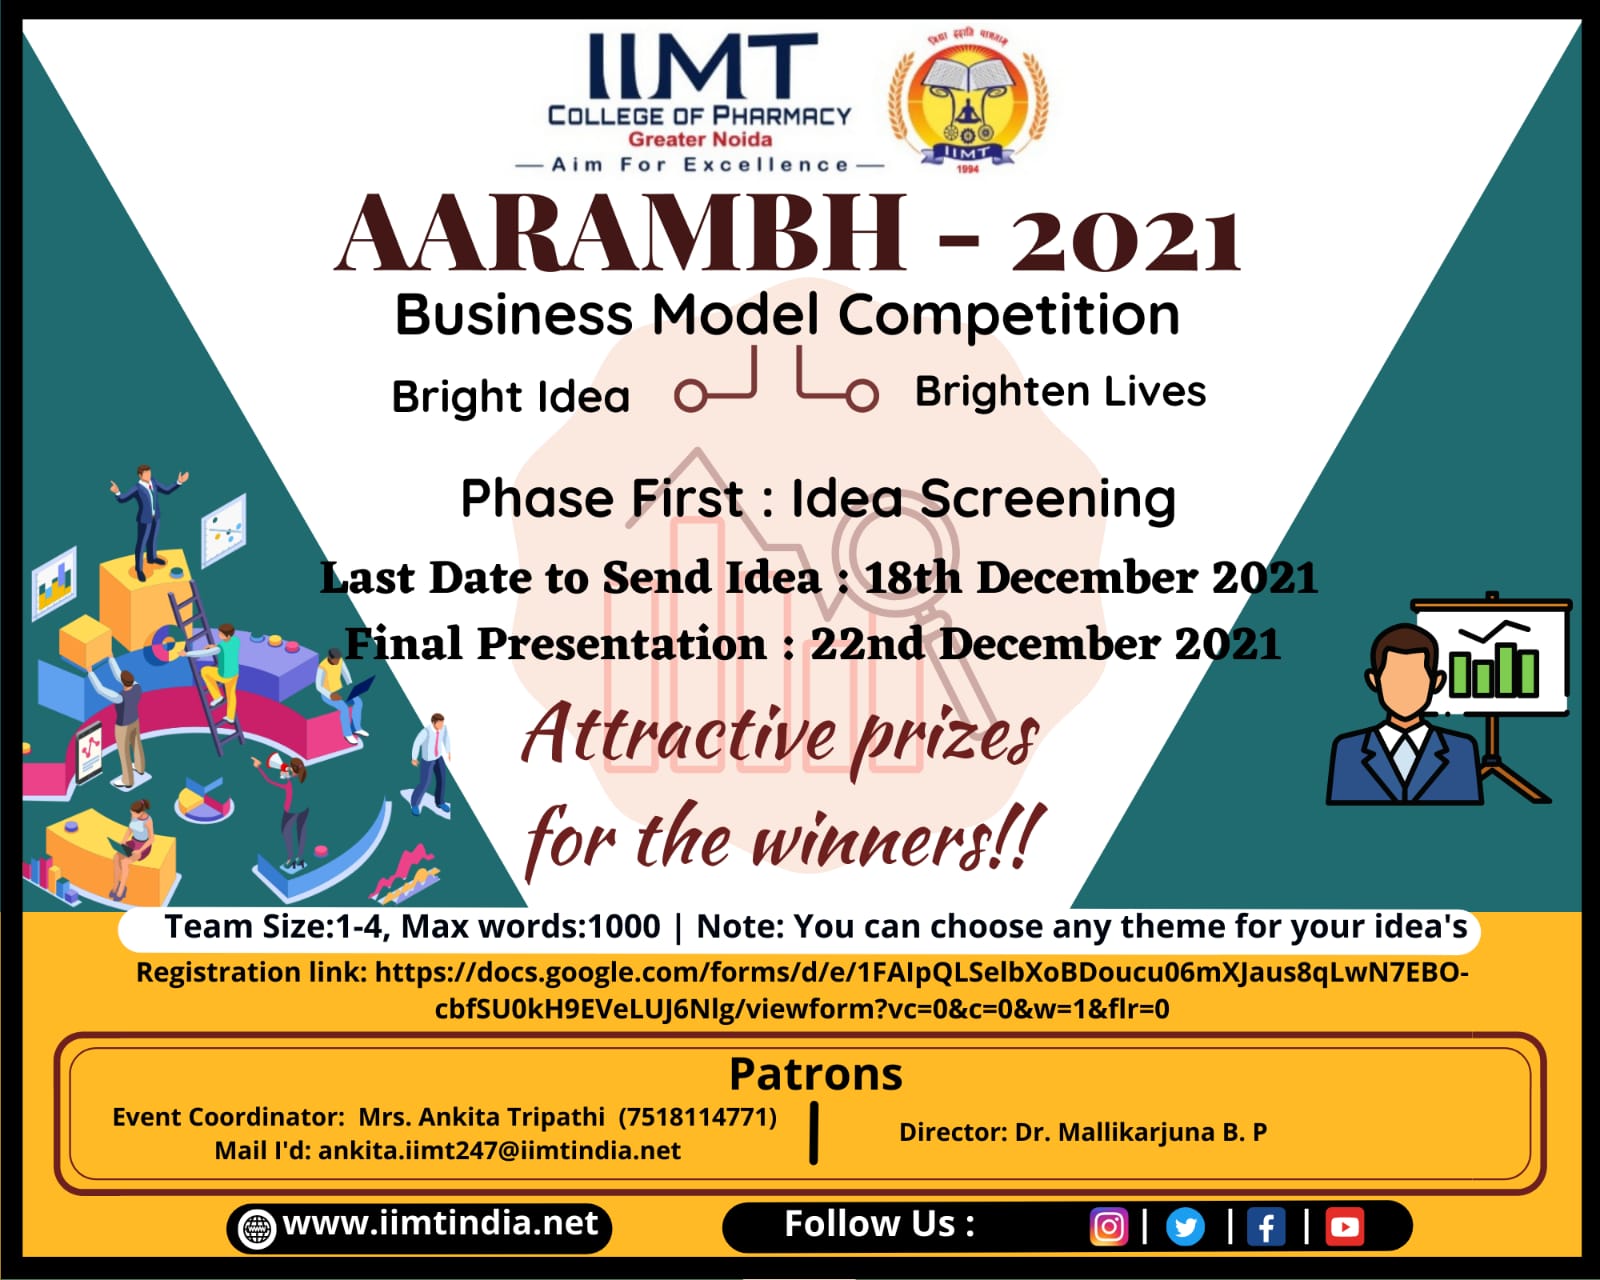 BUSINESS MODEL COMPETITION AARAMBH-2021